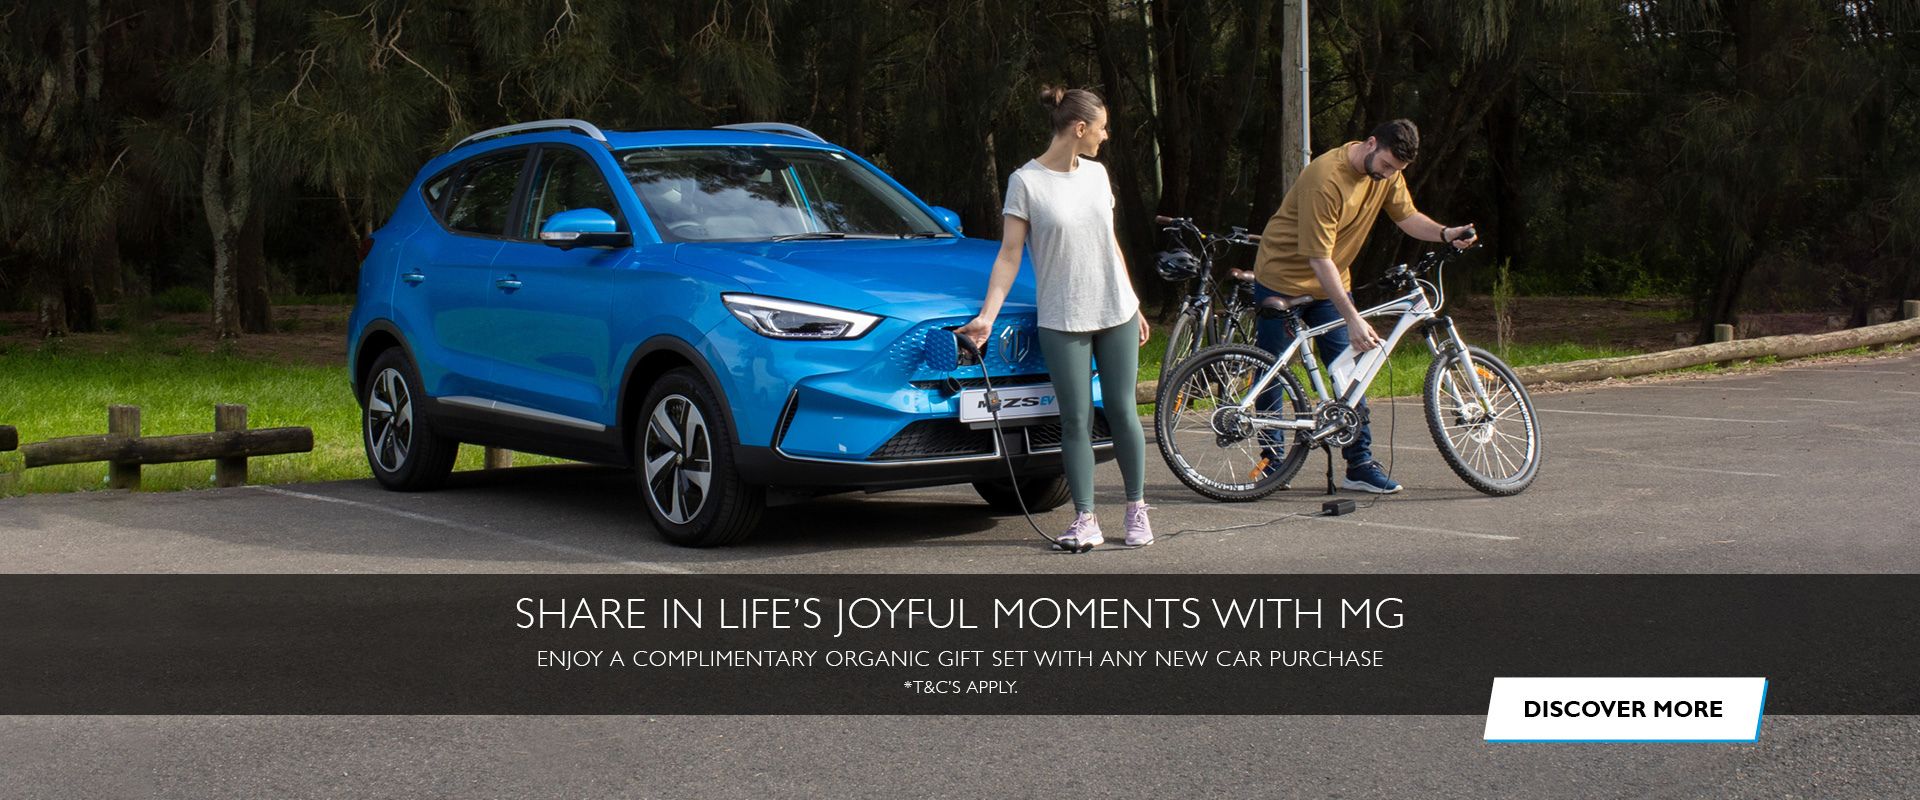 Share in Life's Joyful Moments with MG. Enjoy a complimentary organic gift set with any new car purchase